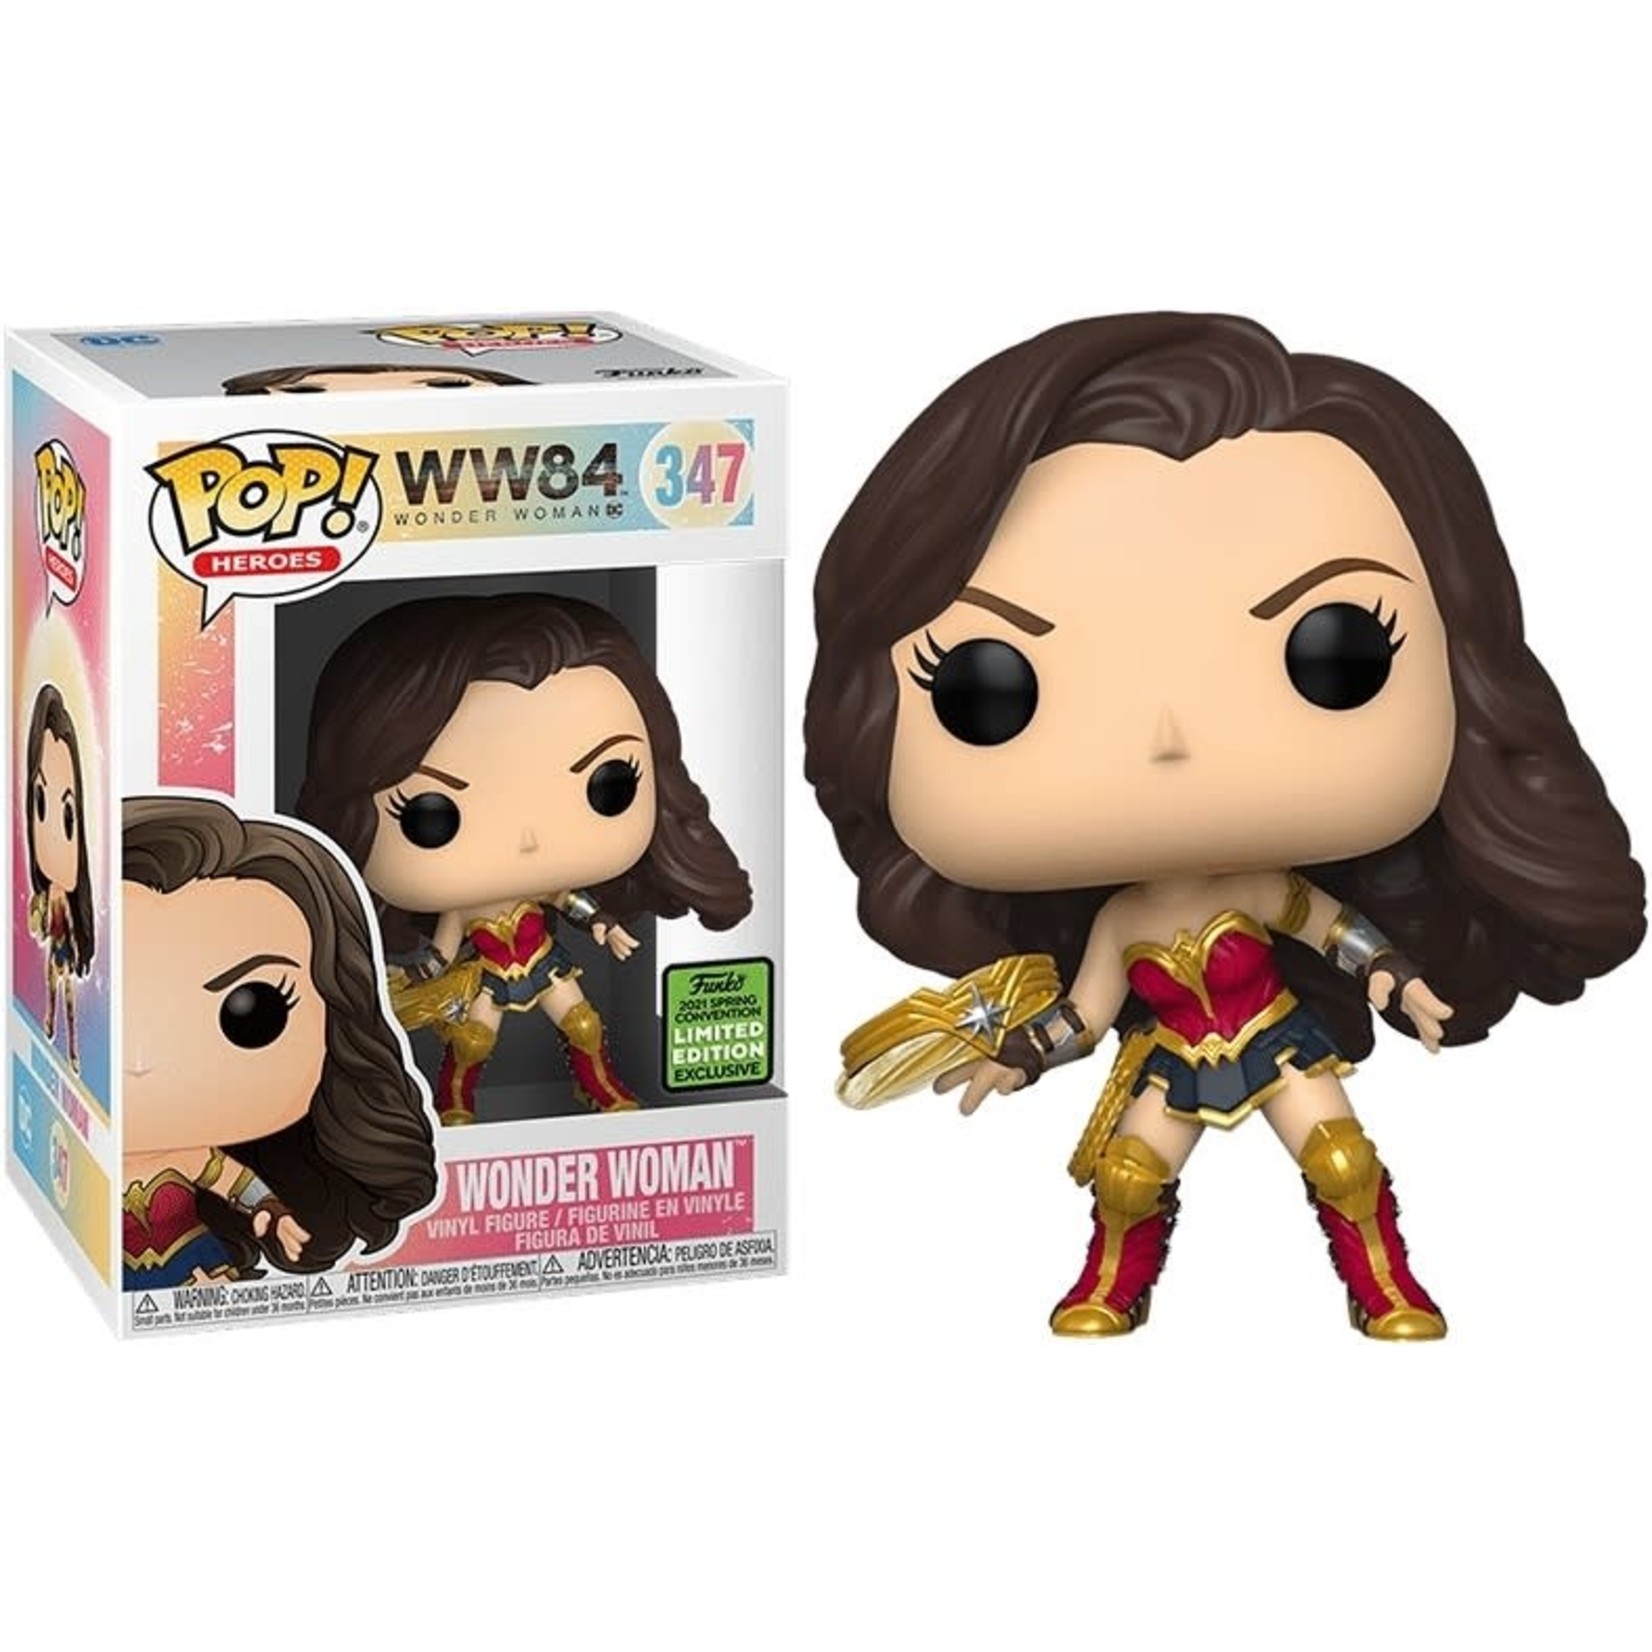 Funko Heroes DC 0347 Wonder Woman with Tiara Boomerang Spring Convention 2021 Limited Edition WW84 Wonder Woman 1984